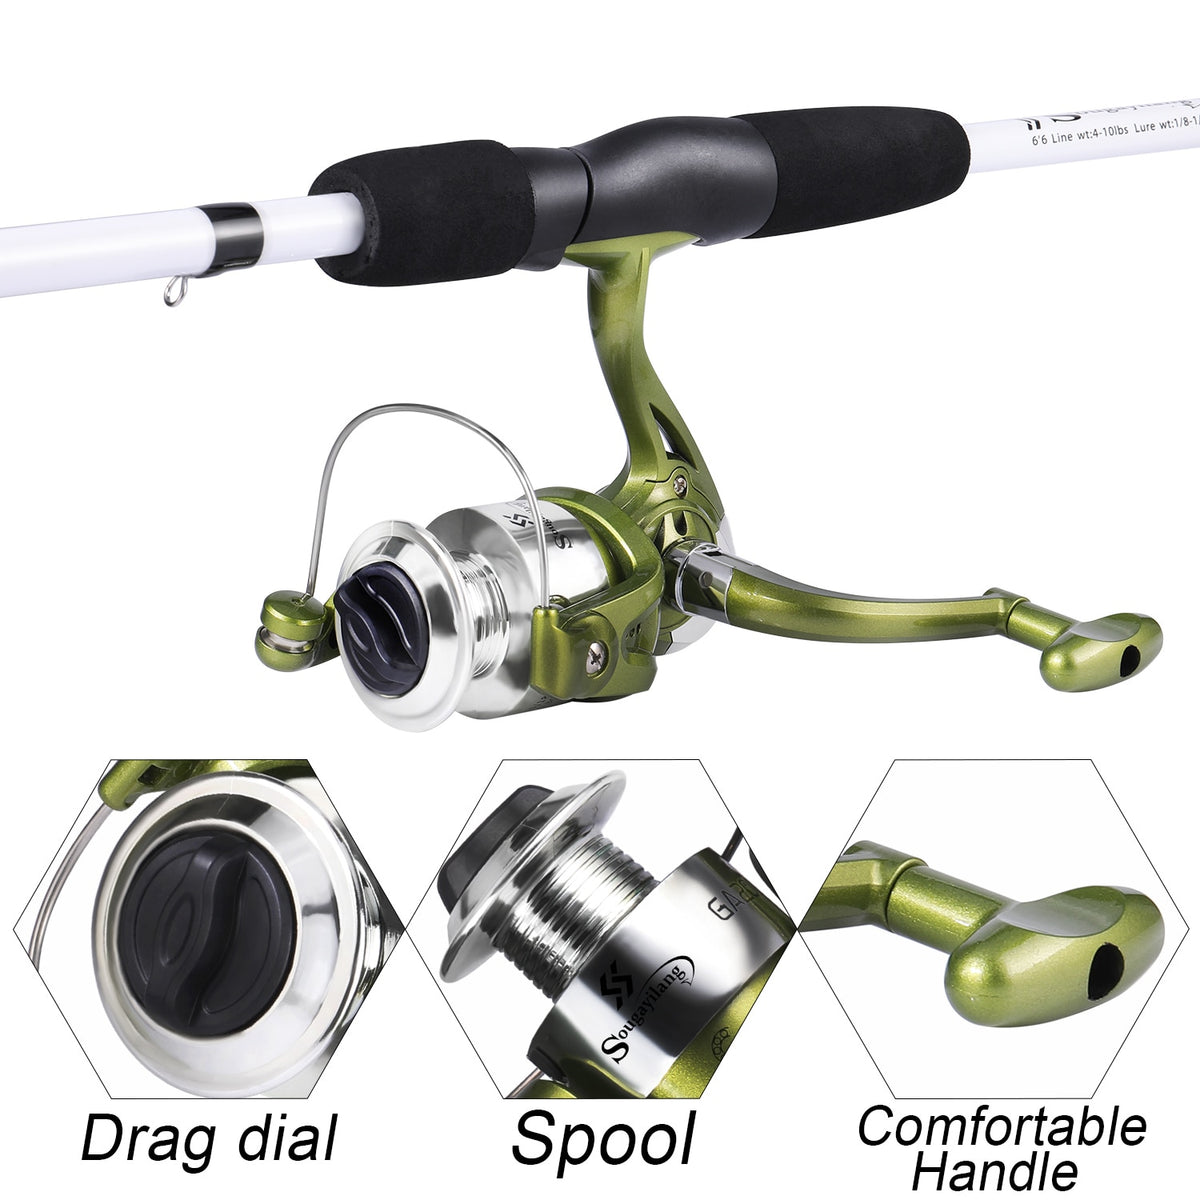 Fishing Rod Fishing Rod Combo Carbon Fiber 4 Piece Casting Rod and Baitcasting  Reel Saltwater Lure Bass Fishing Set Fishing Pole (Bundles : 1.8m and Left  Hand, Color : Rod Reel), Spinning